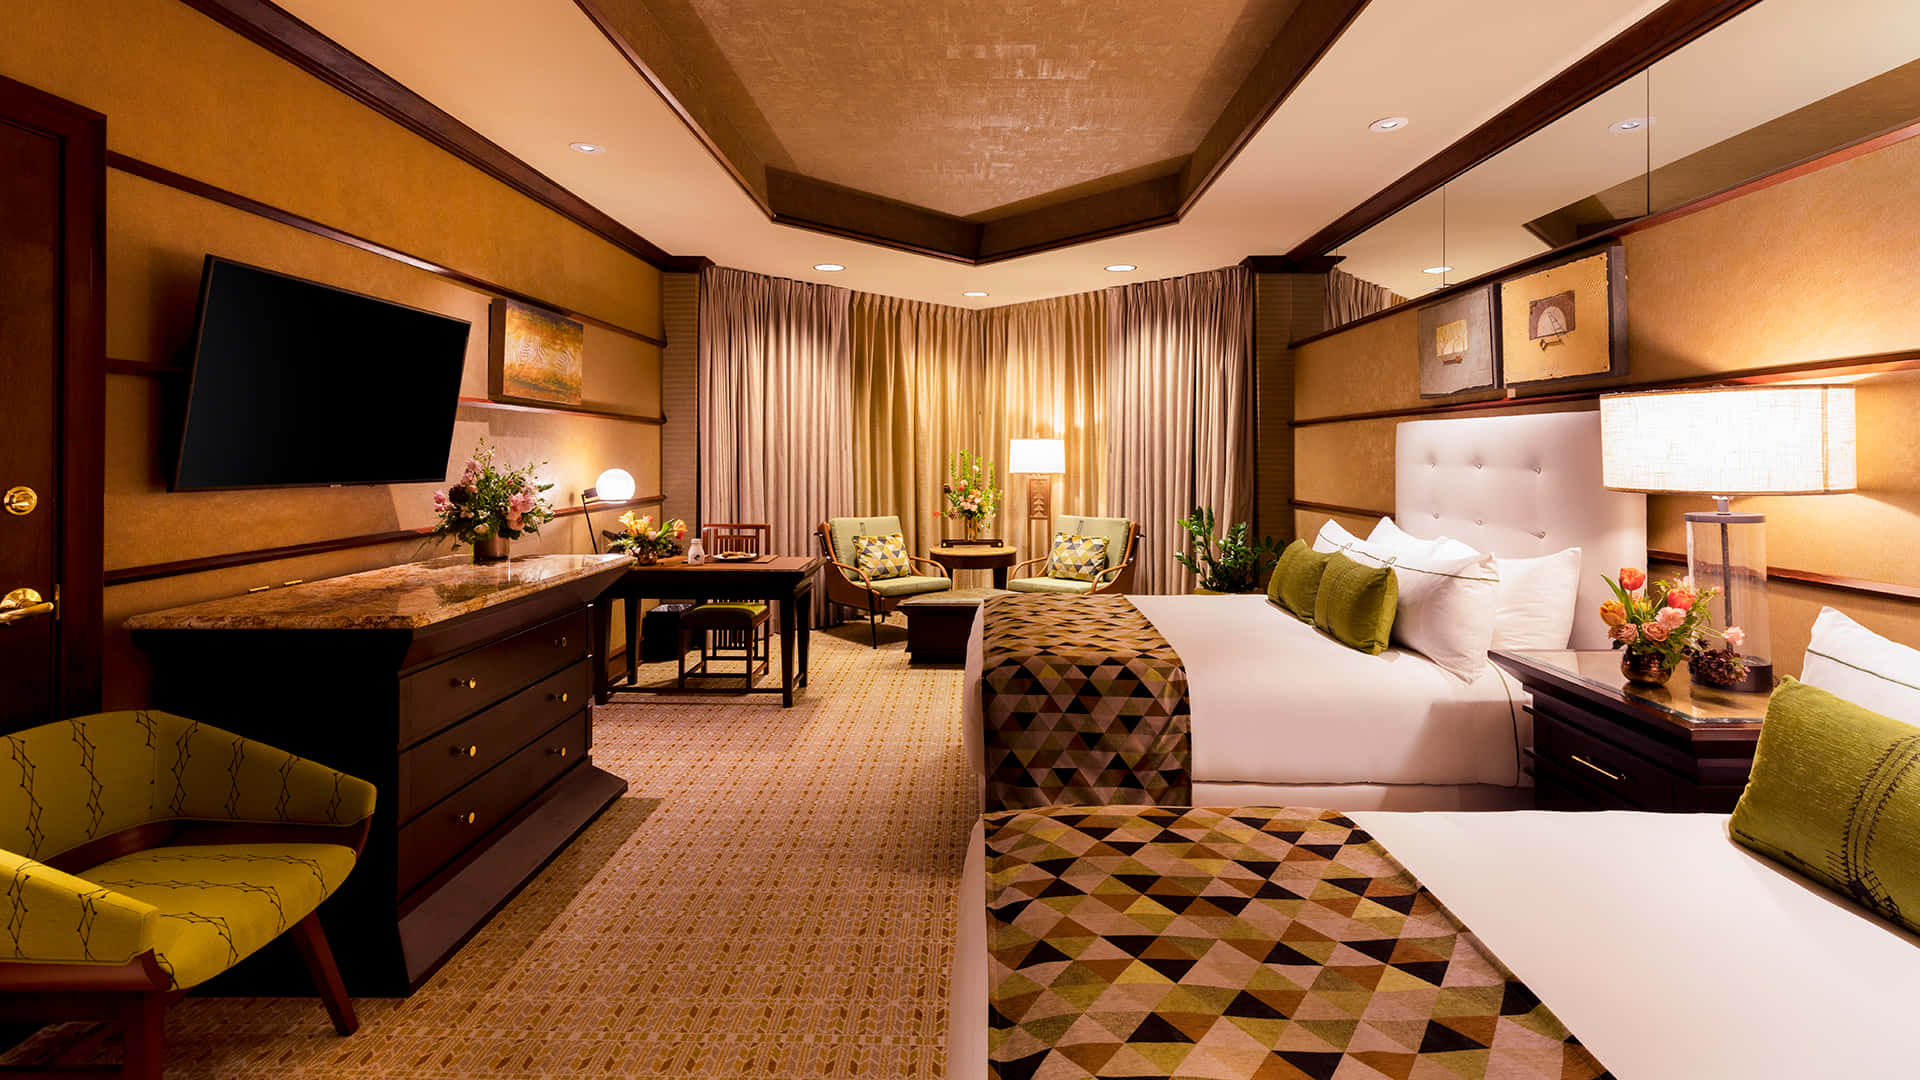 Elegant Luxury Hotel Room with Double Bed Wallpaper